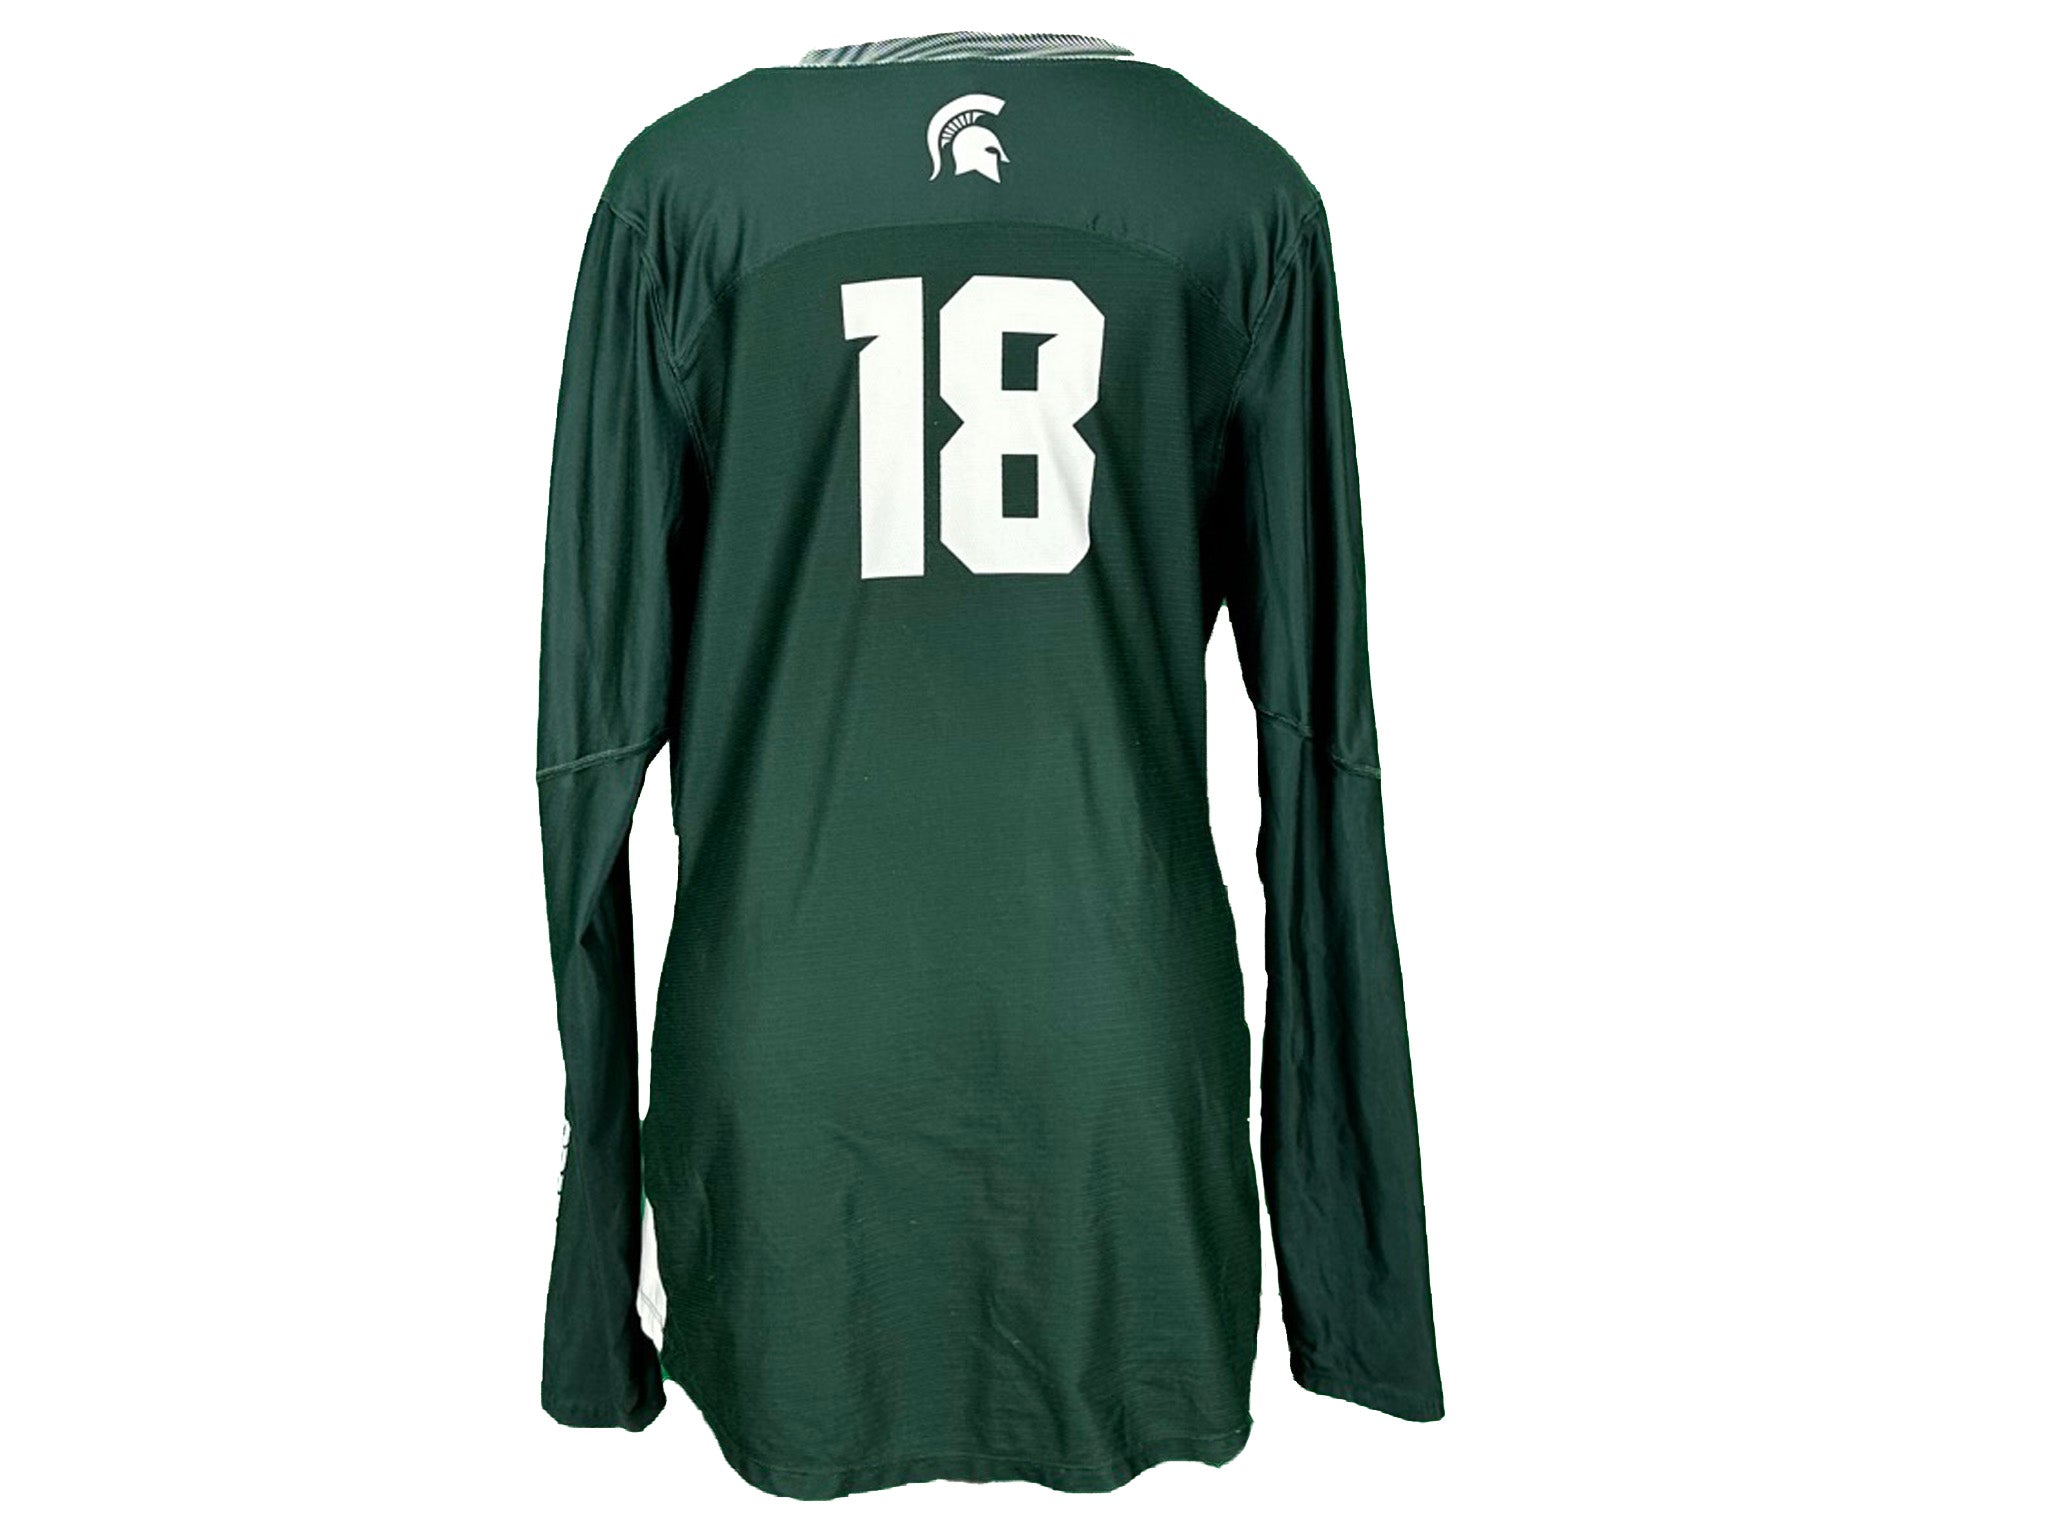 Nike Green 2018-2021 Long Sleeve Volleyball Jersey #18 w/ Patch Women's Size XL